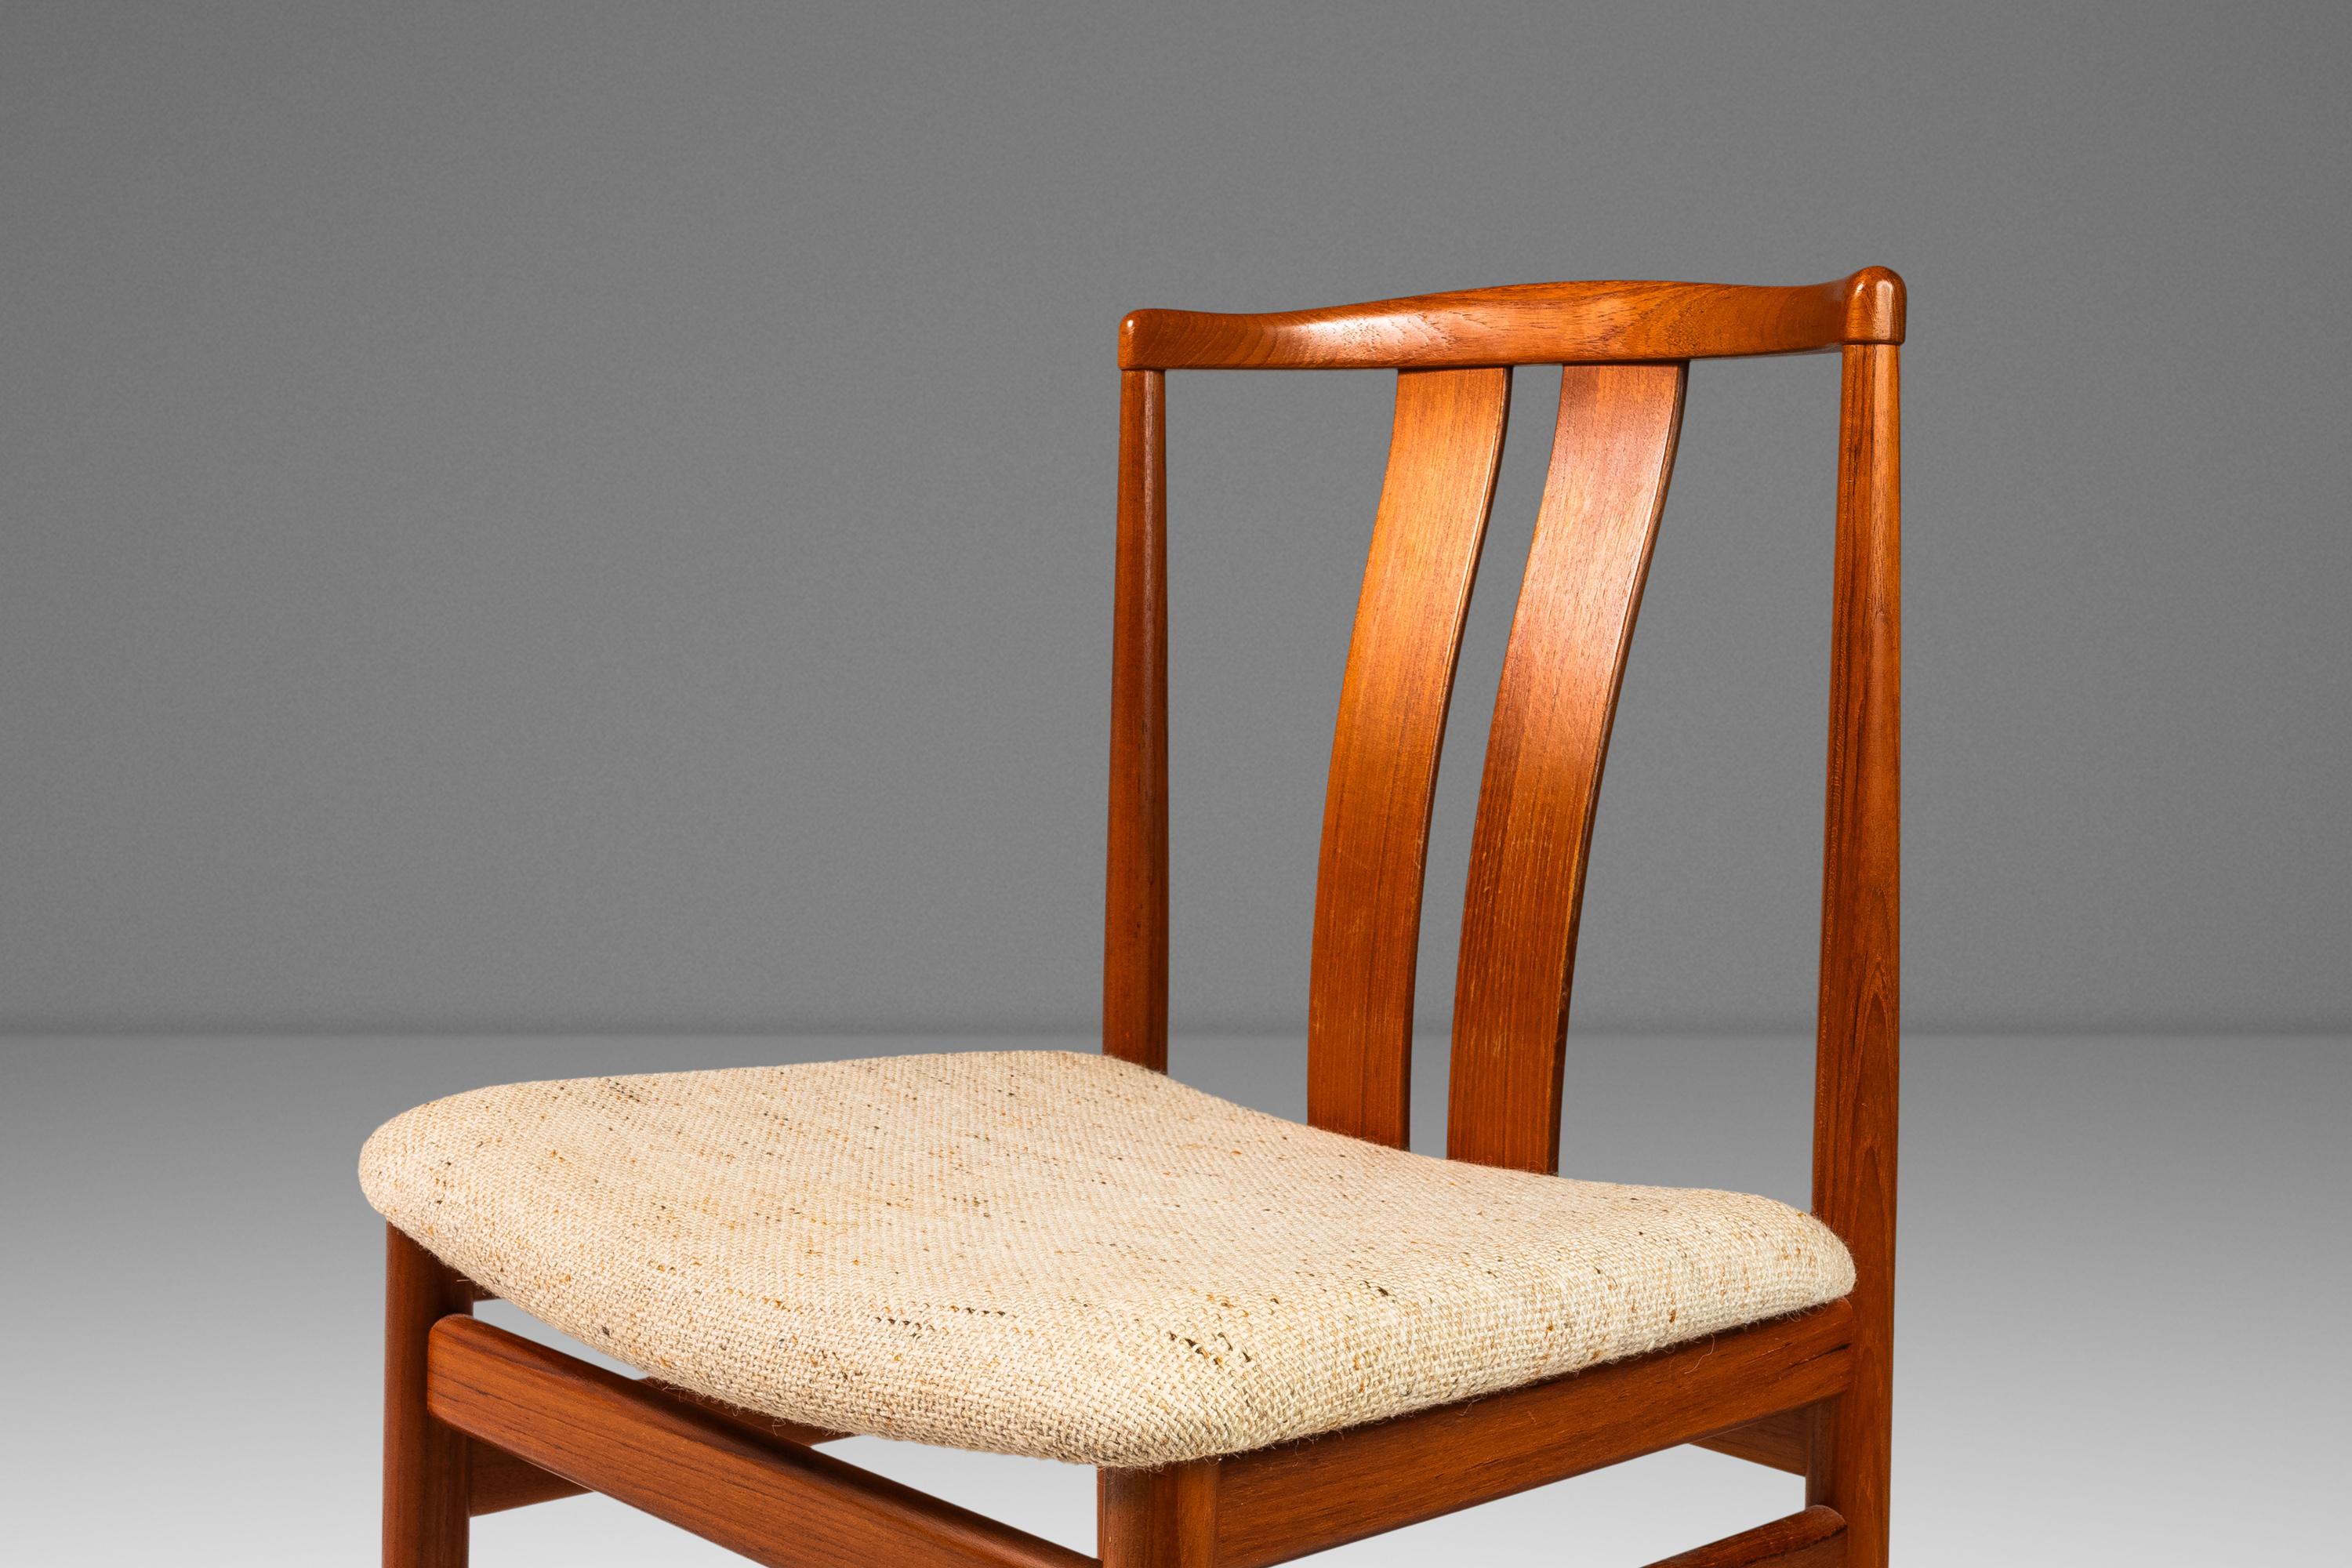 Set of 4 Dining Chairs, Teak & Oatmeal Knit Fabric by Vamdrup Stolefabrik, 1960s For Sale 5